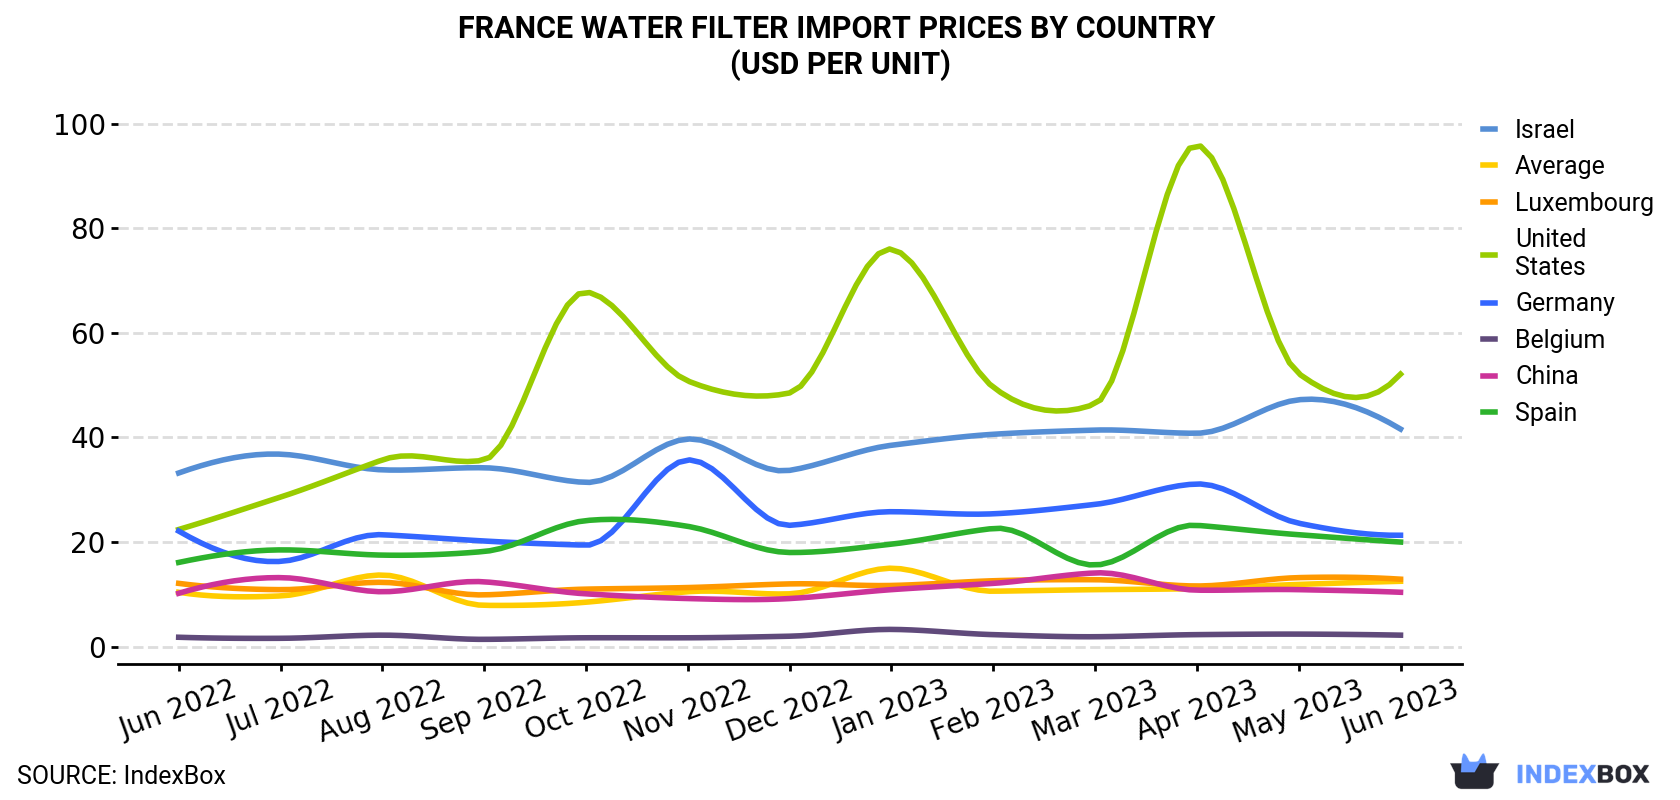 France Water Filter Import Prices By Country (USD Per Unit)